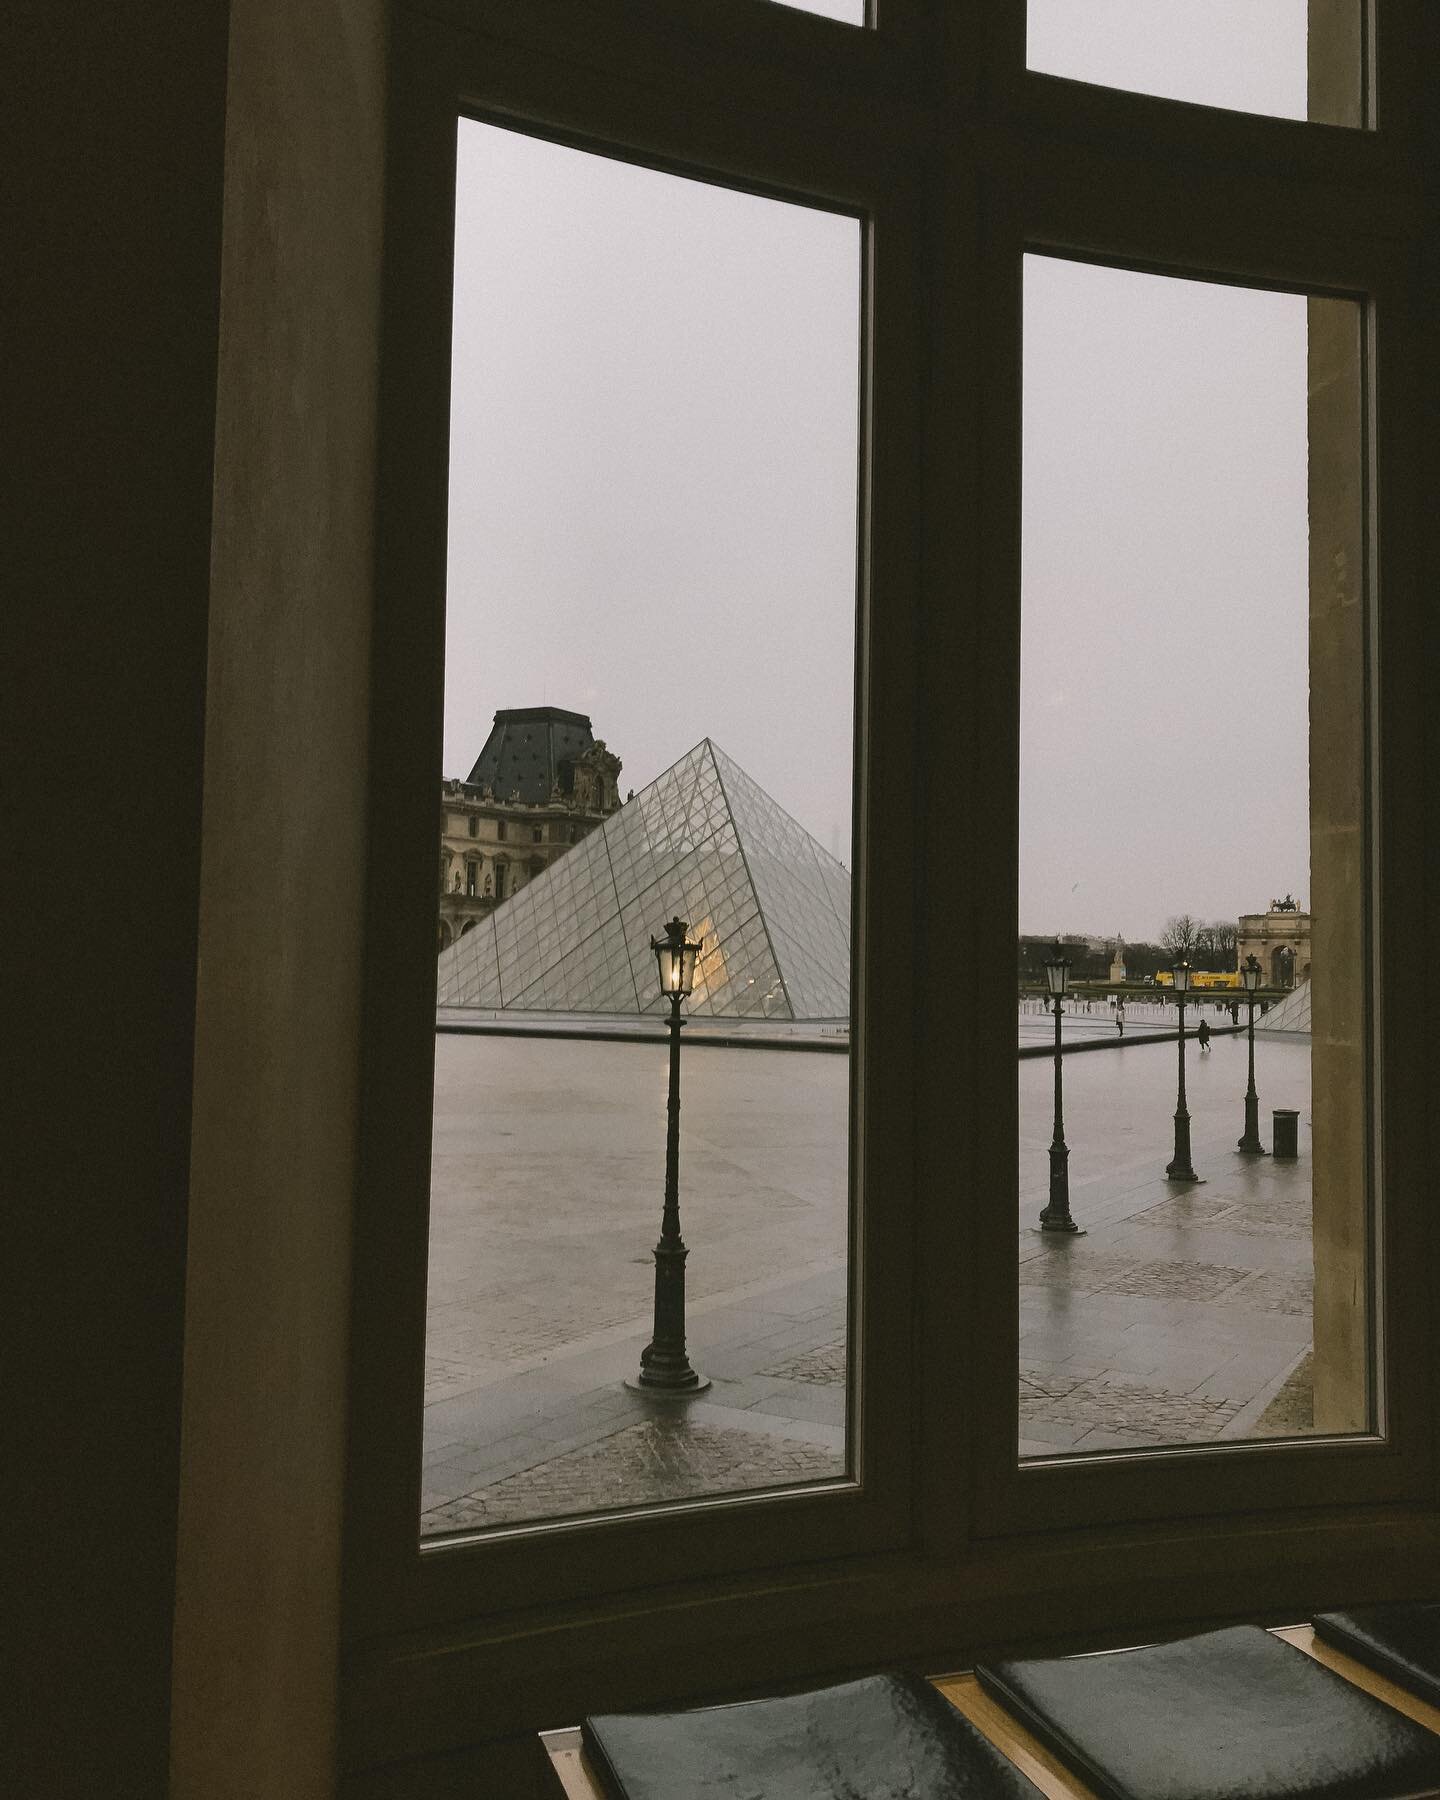 The Louvre &mdash; A solo female traveler&rsquo;s safe haven.